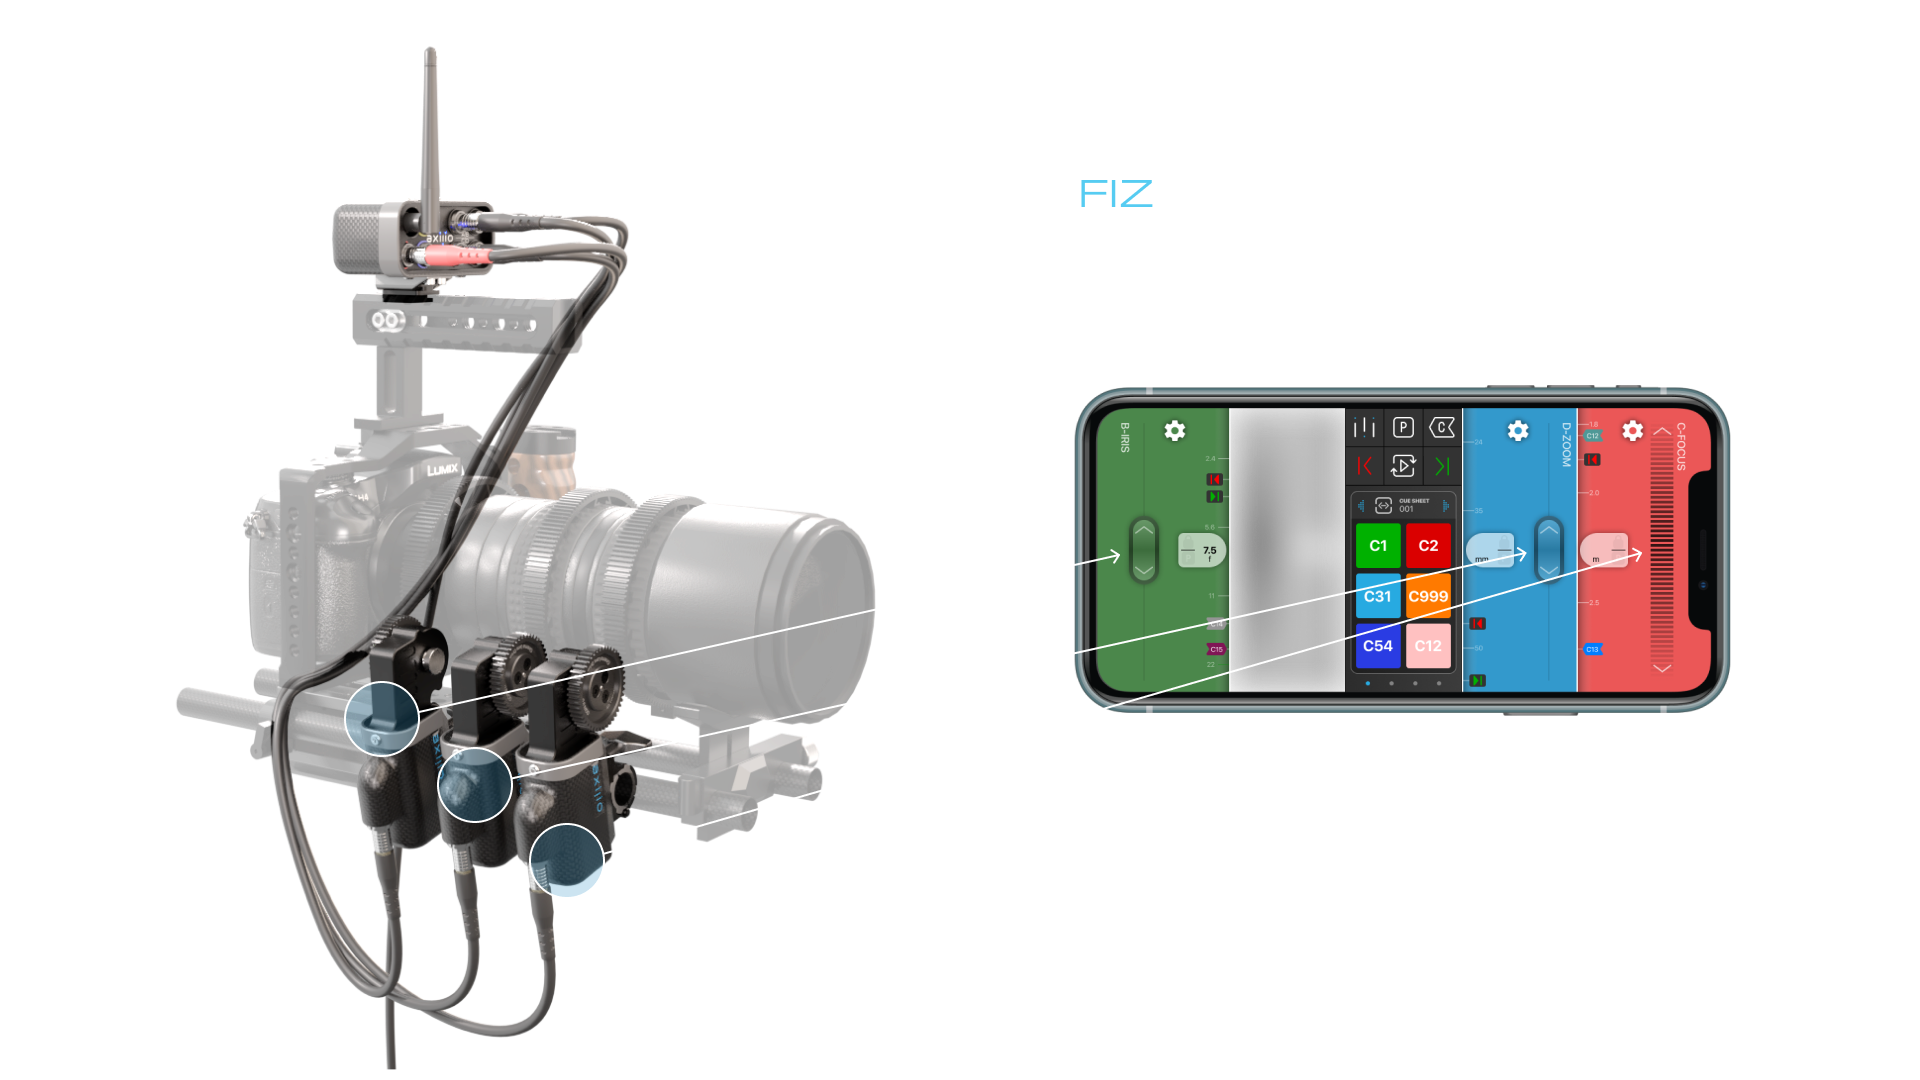 App based FIZ control that works. Create controllers that suit your workflow, then tweak them to work the way you want.